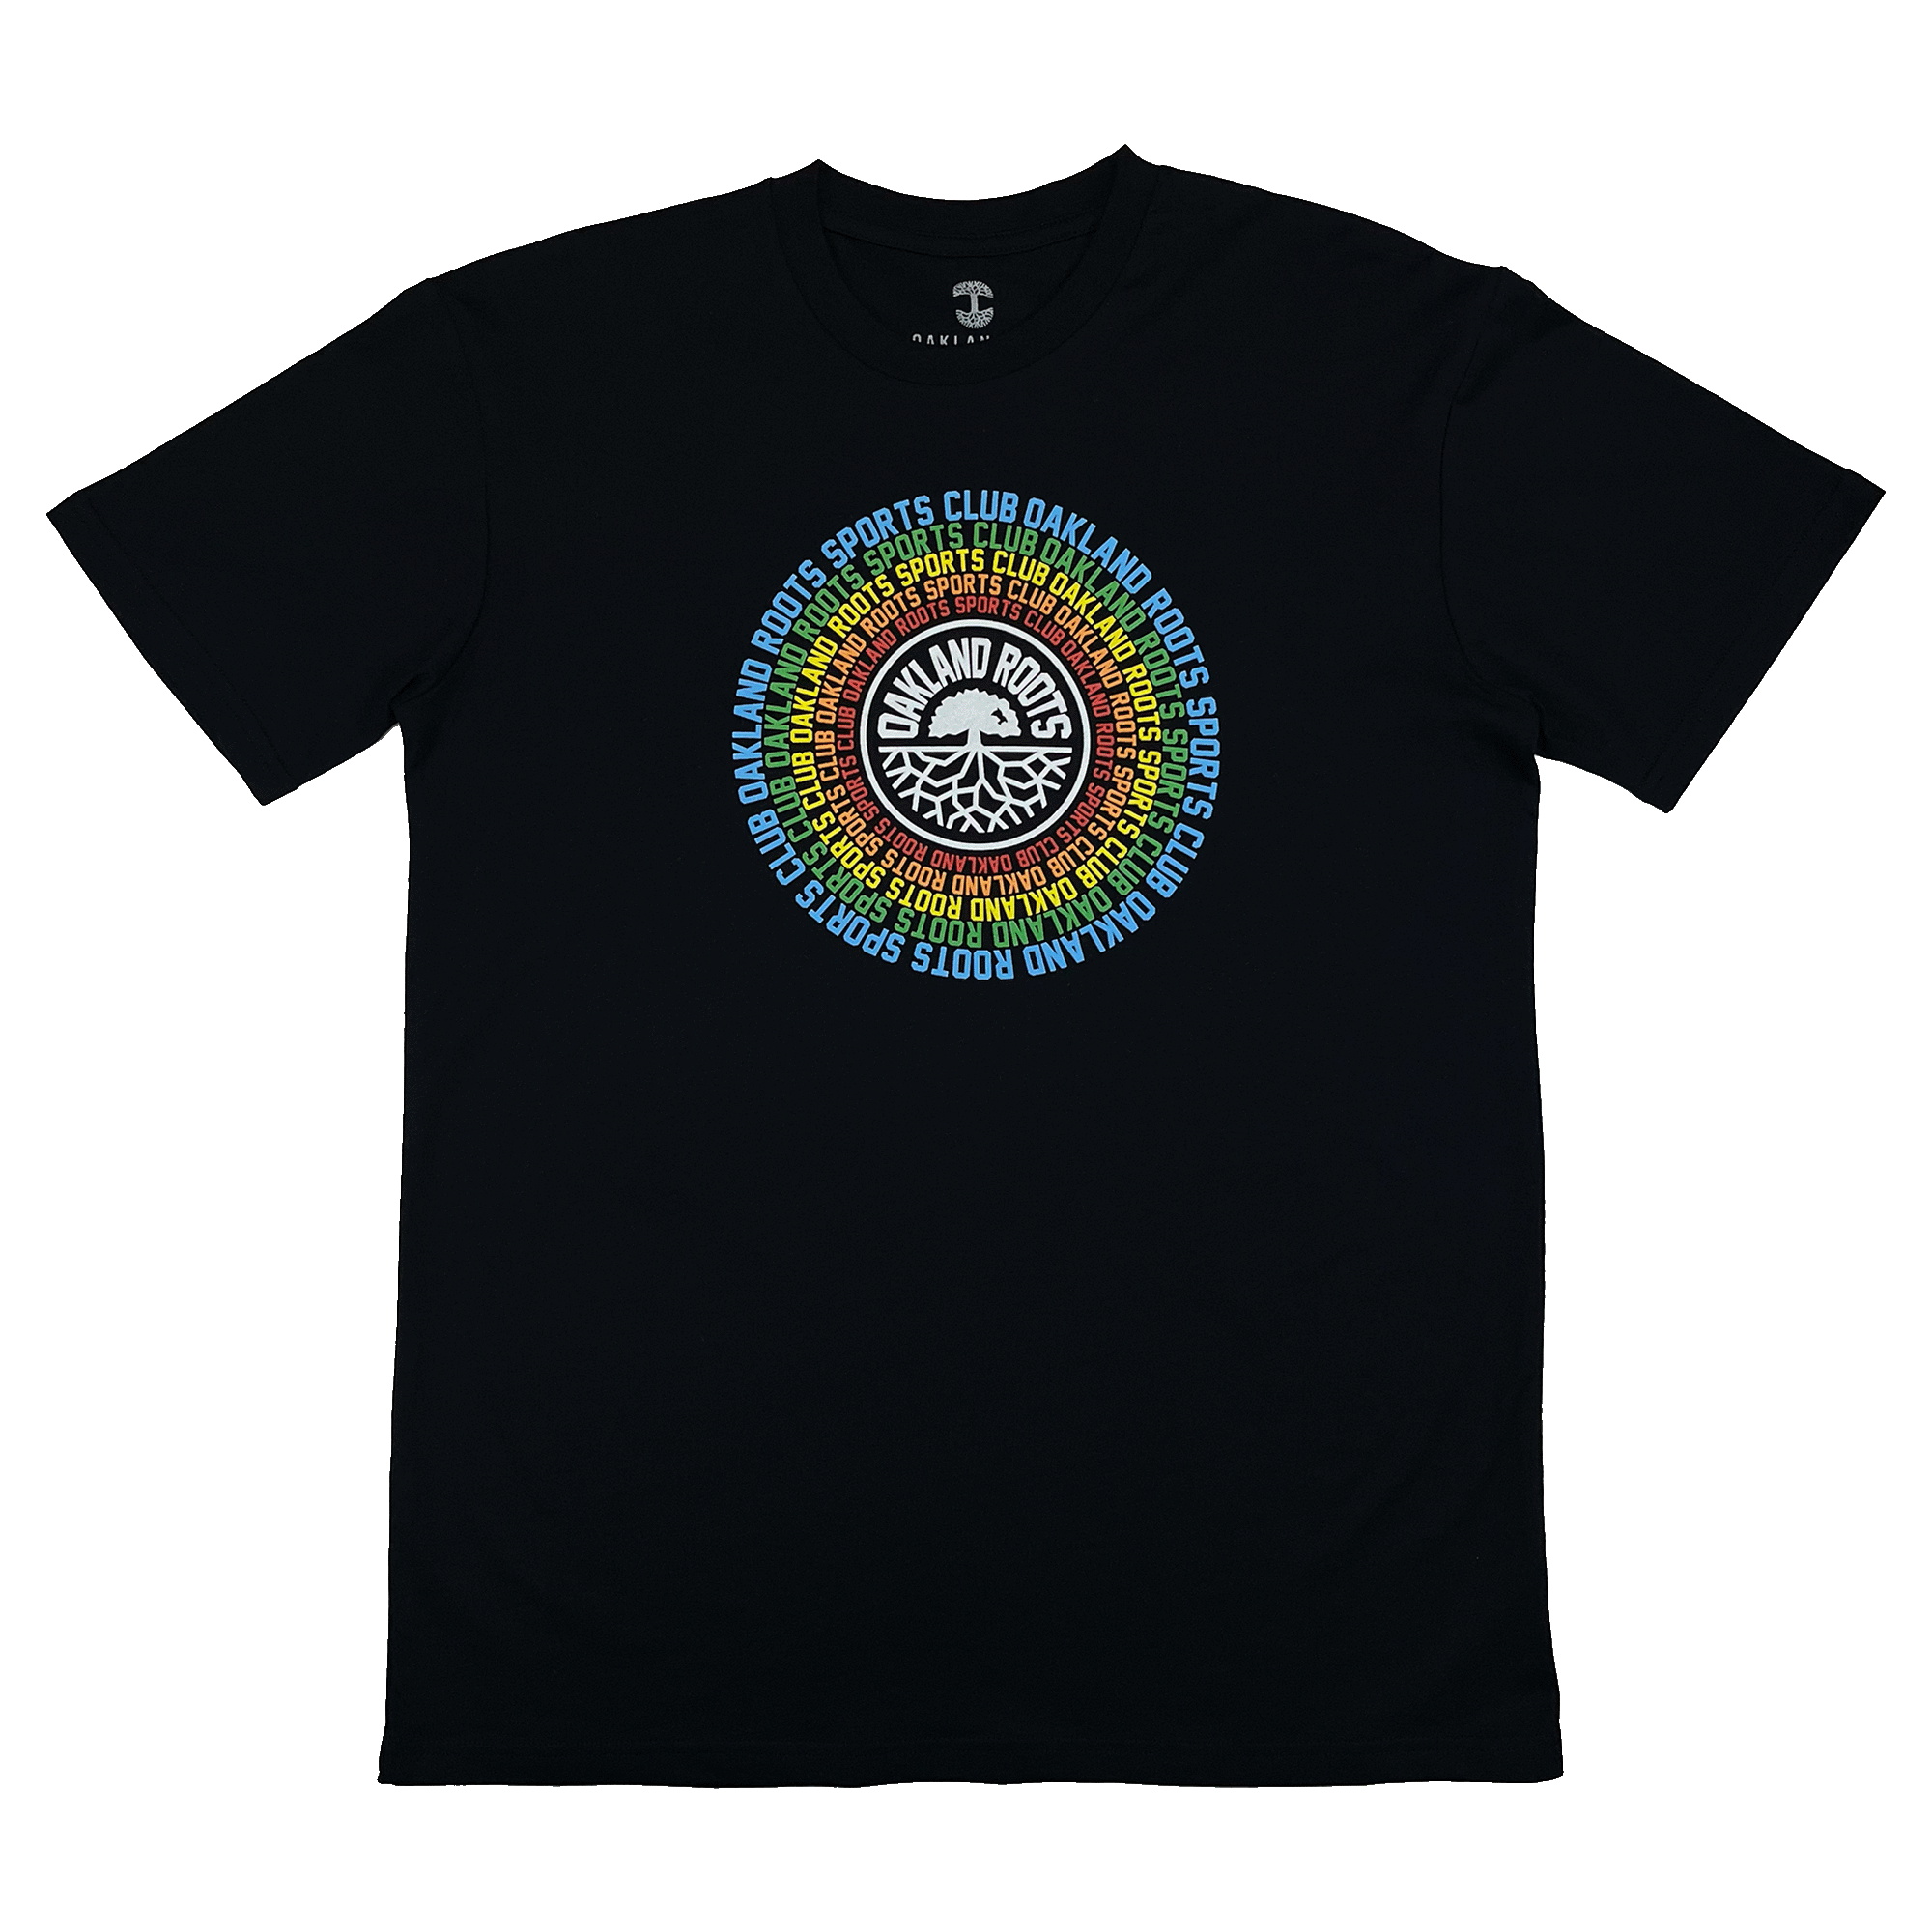 Black t-shirt with Oakland Roots logo and wordmark surrounded by Oakland Roots Sports Club wordmark on repeat in a rainbow circle.